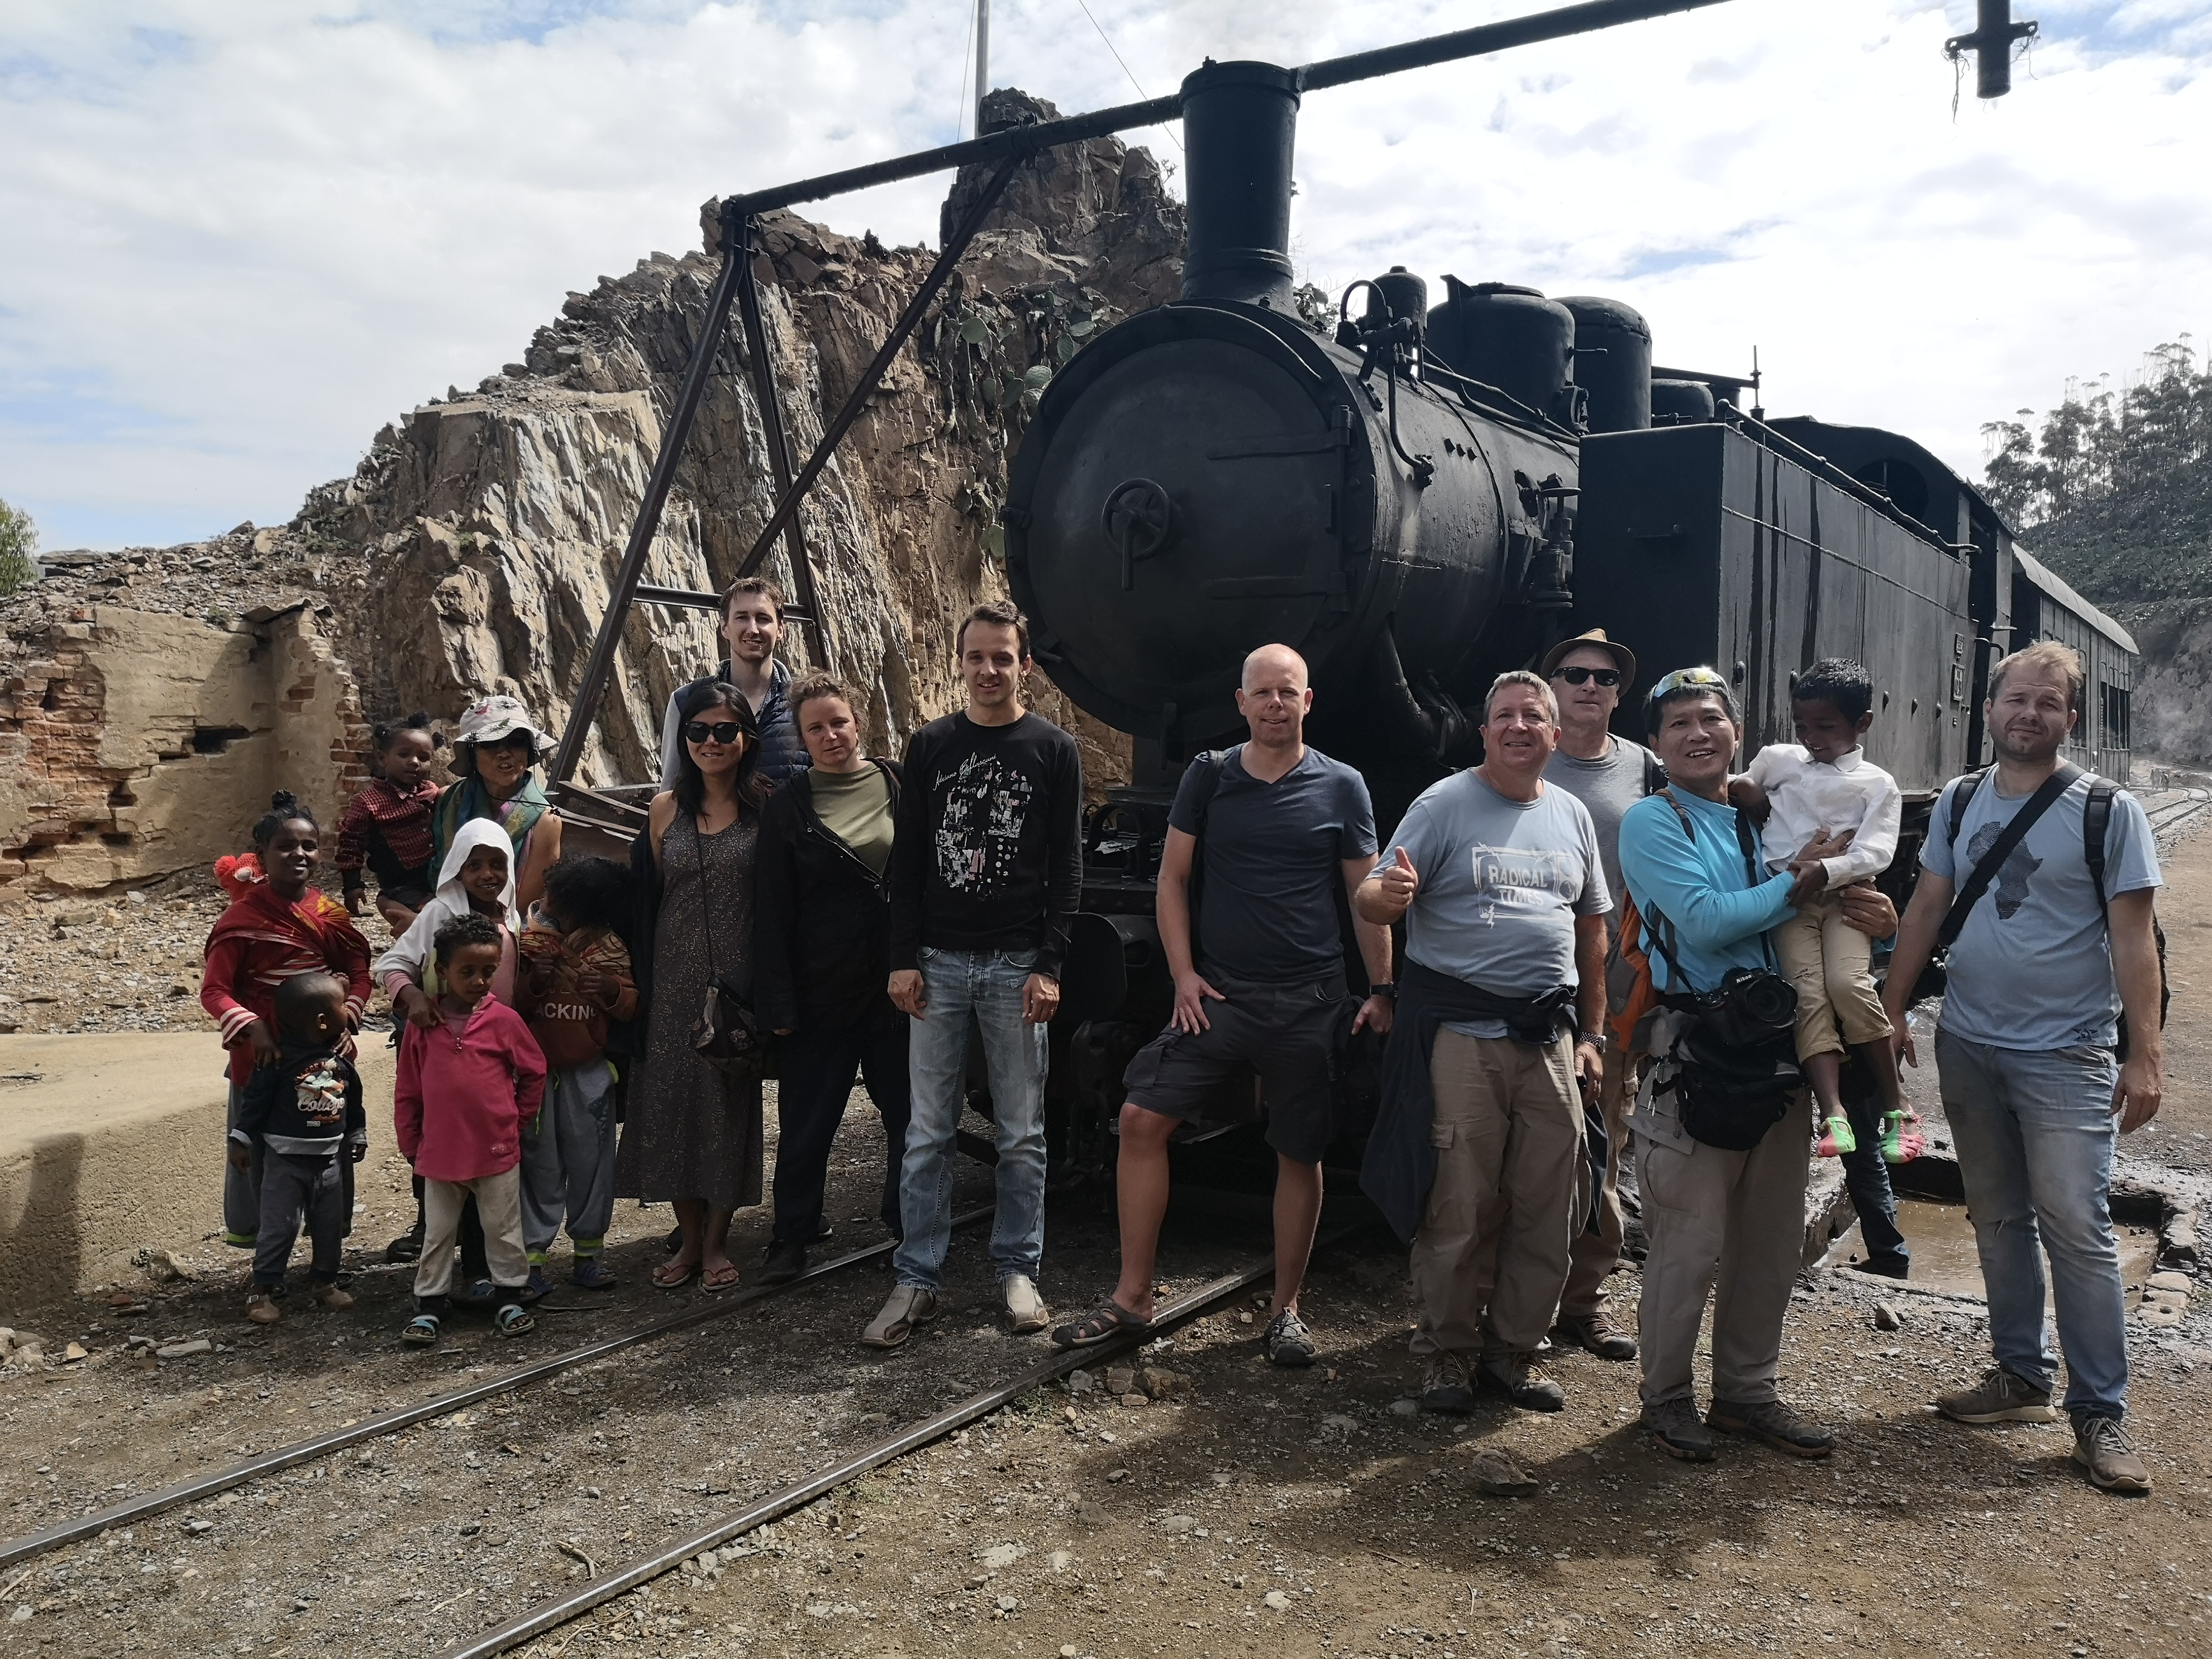 Our group in front of the steam train of Eritrea